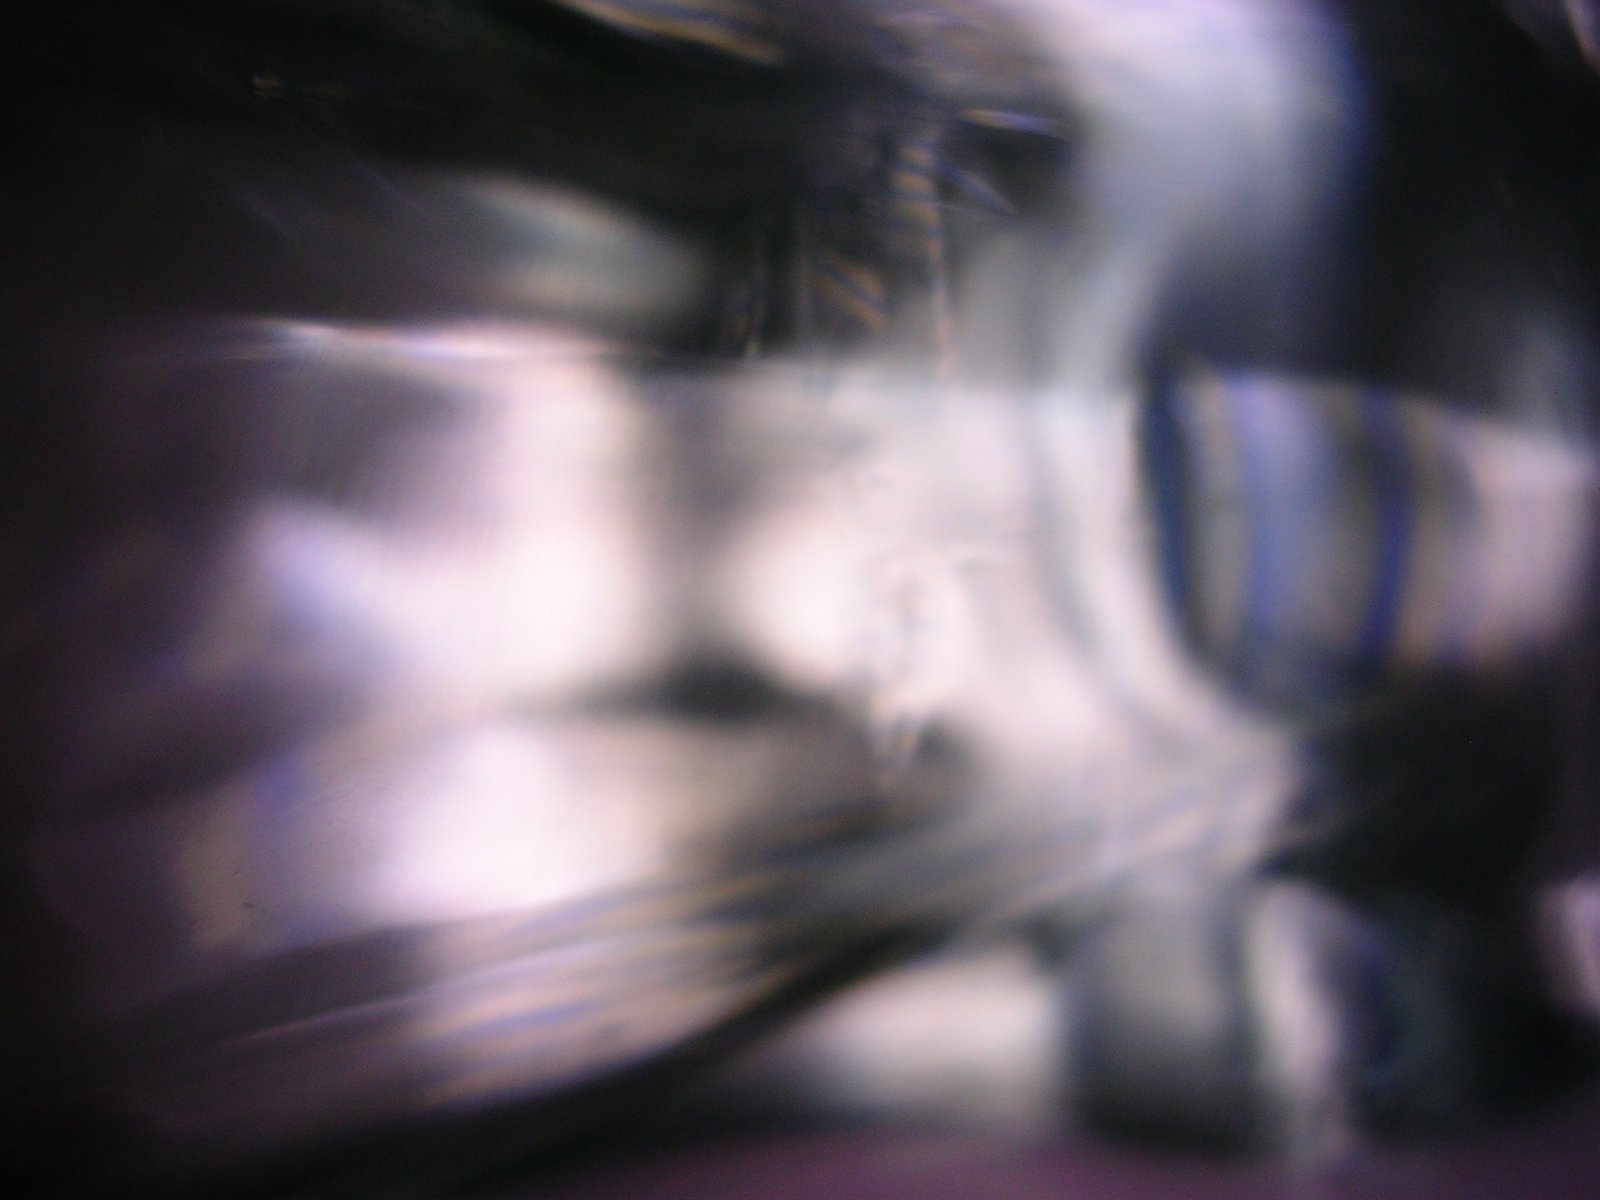 blurry image of abstract images showing an airplane's interior